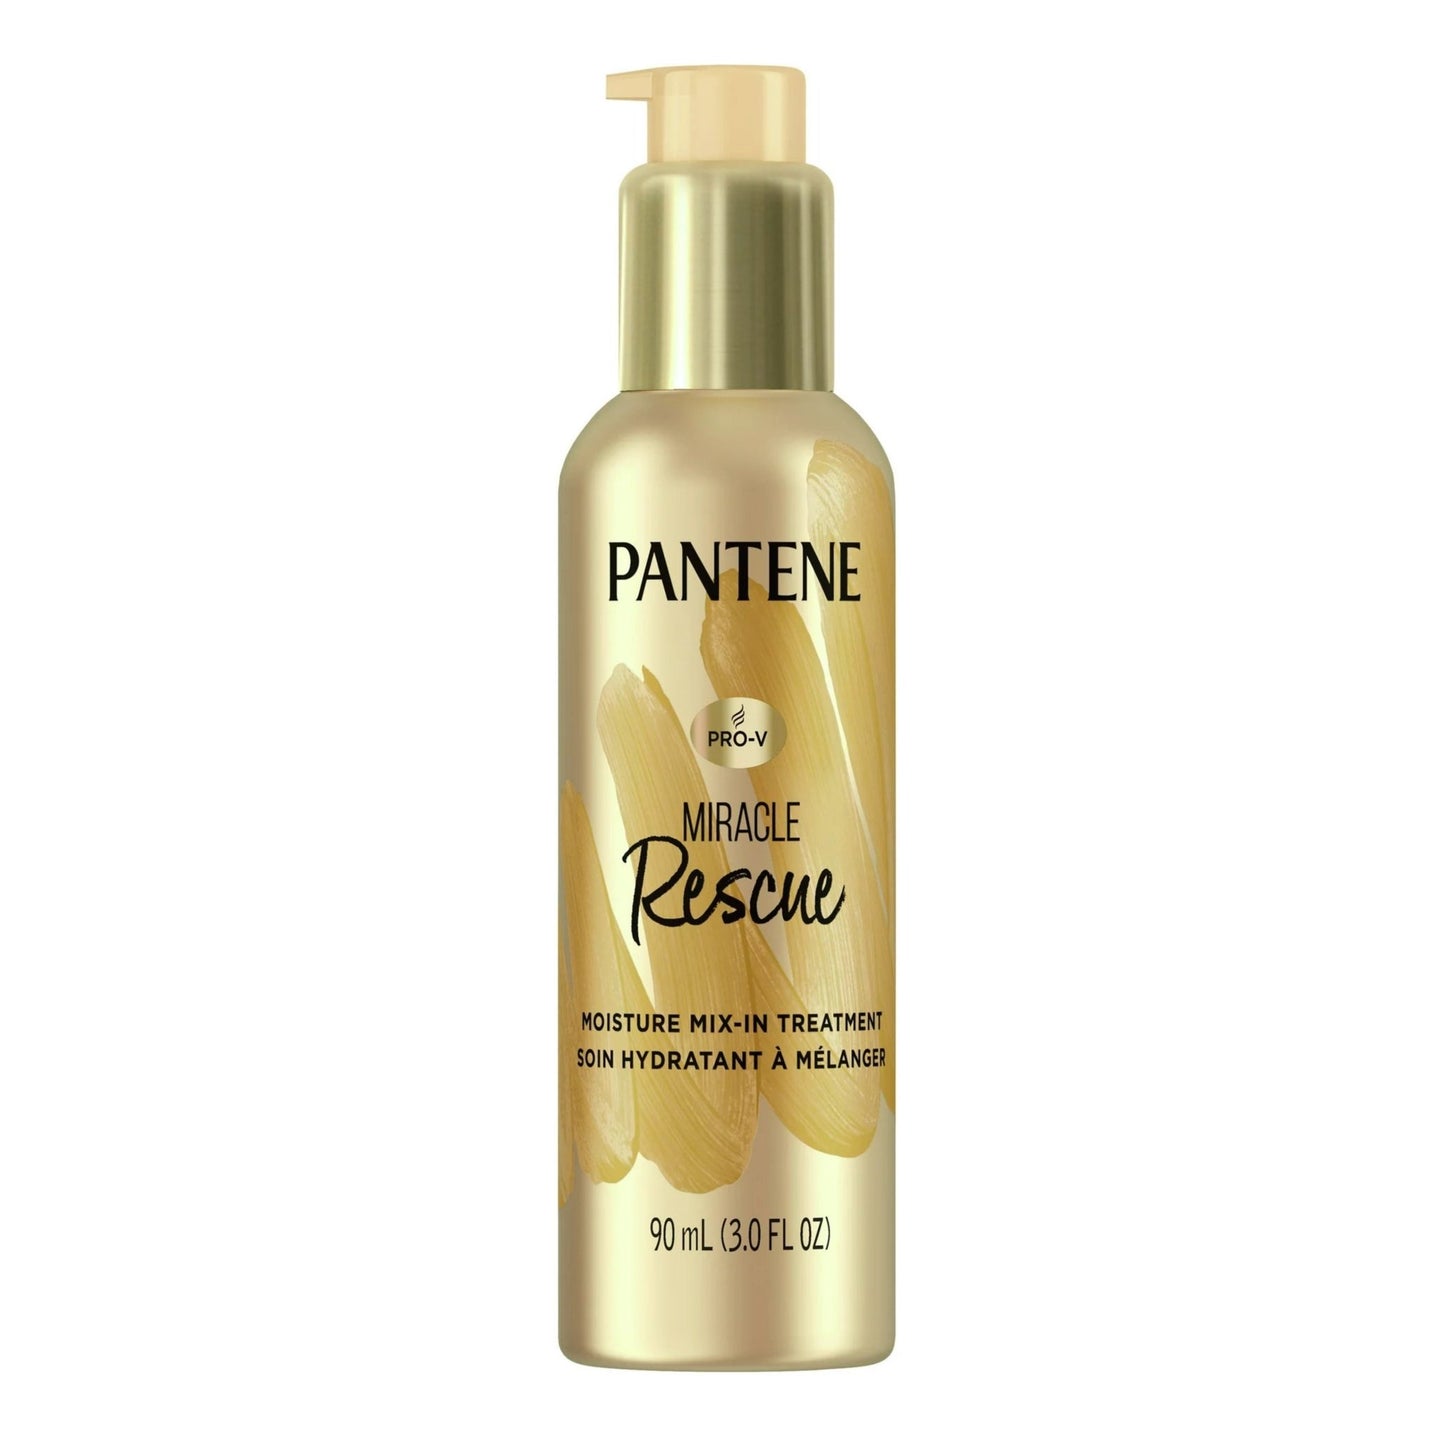 Pantene Miracle Rescue Moisture Mix-In Treatment (90mL)